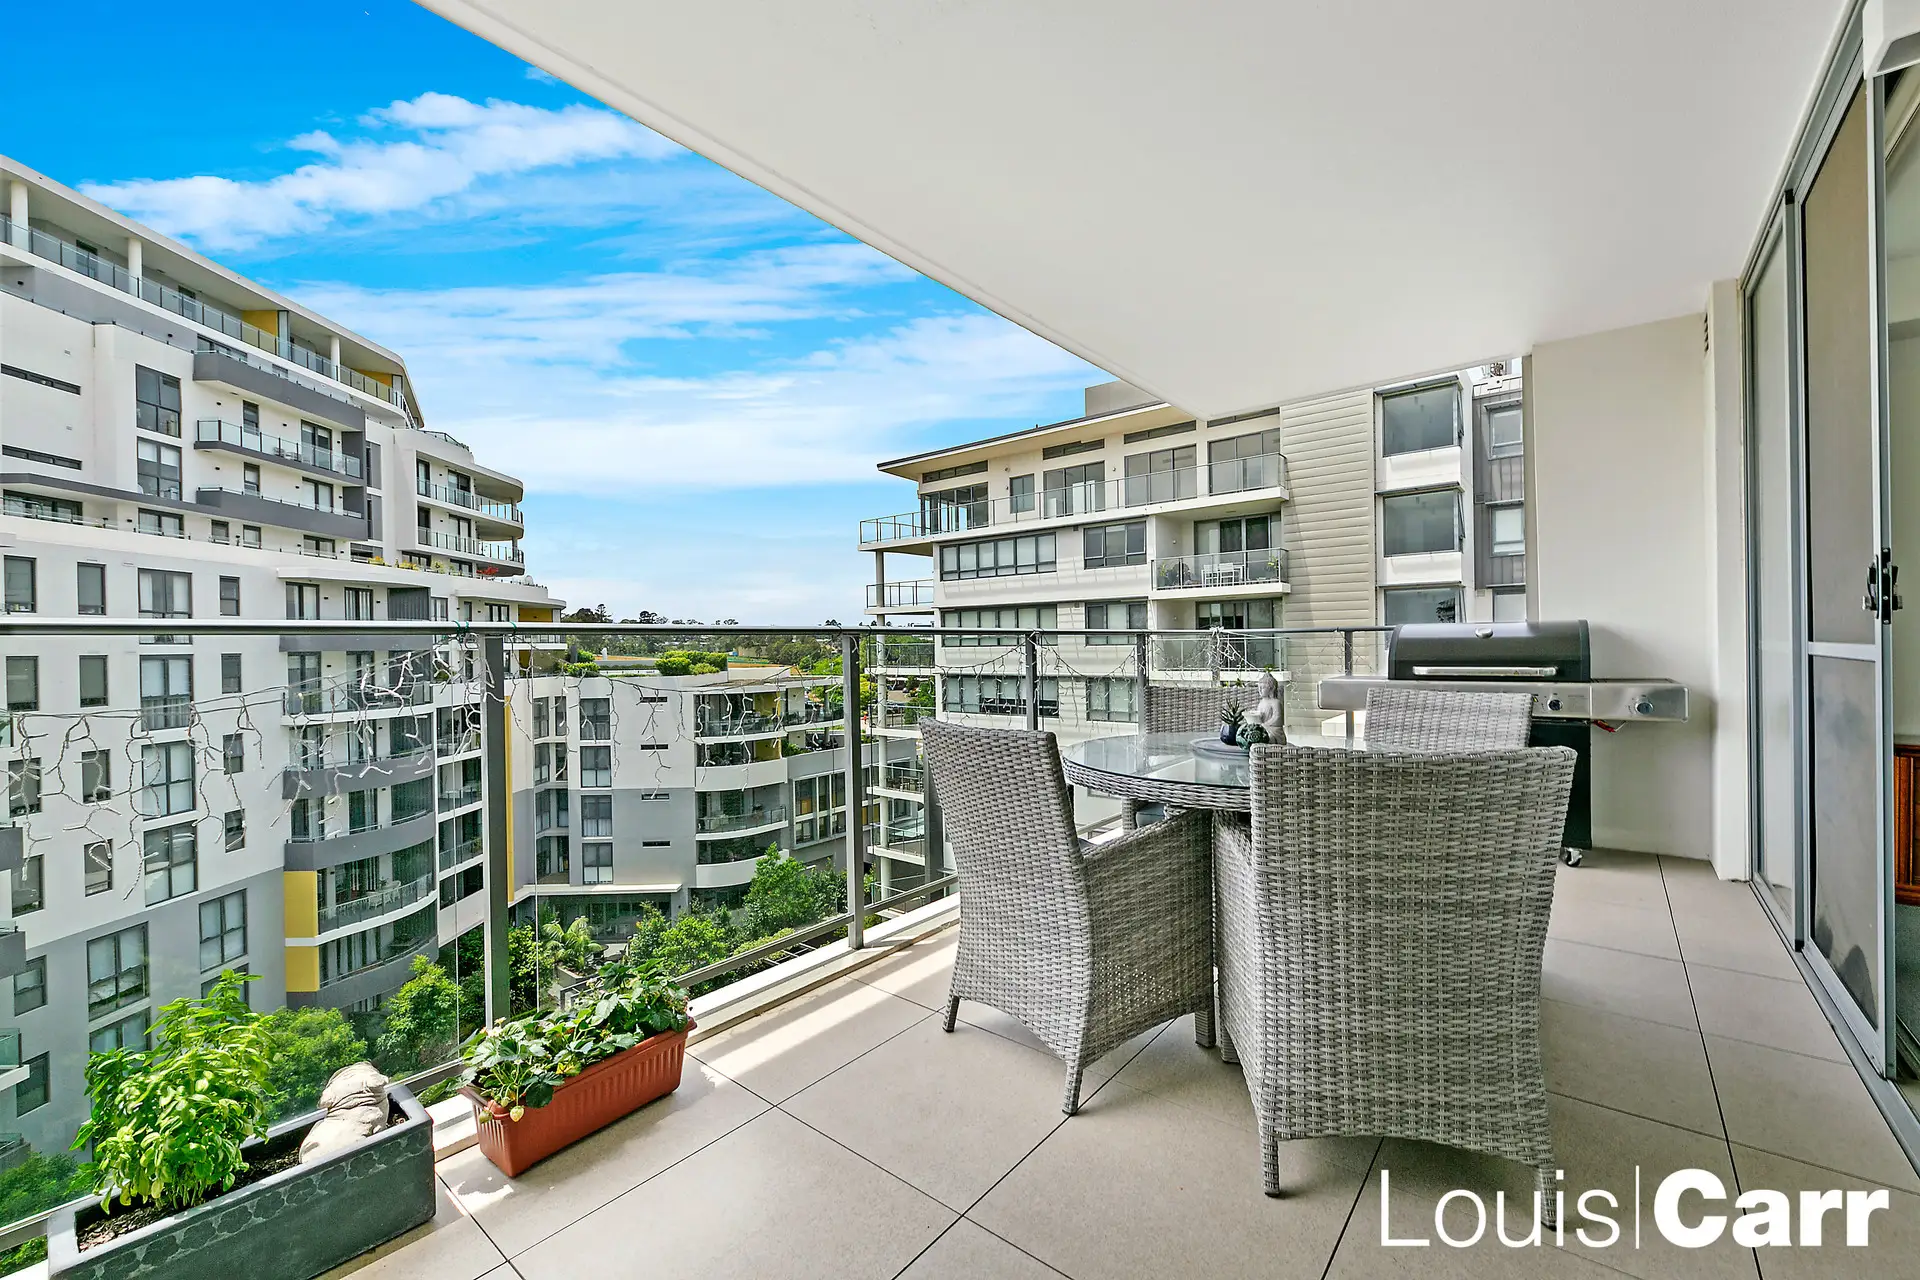 Photo #9: 74/38 Solent Circuit, Norwest - Sold by Louis Carr Real Estate